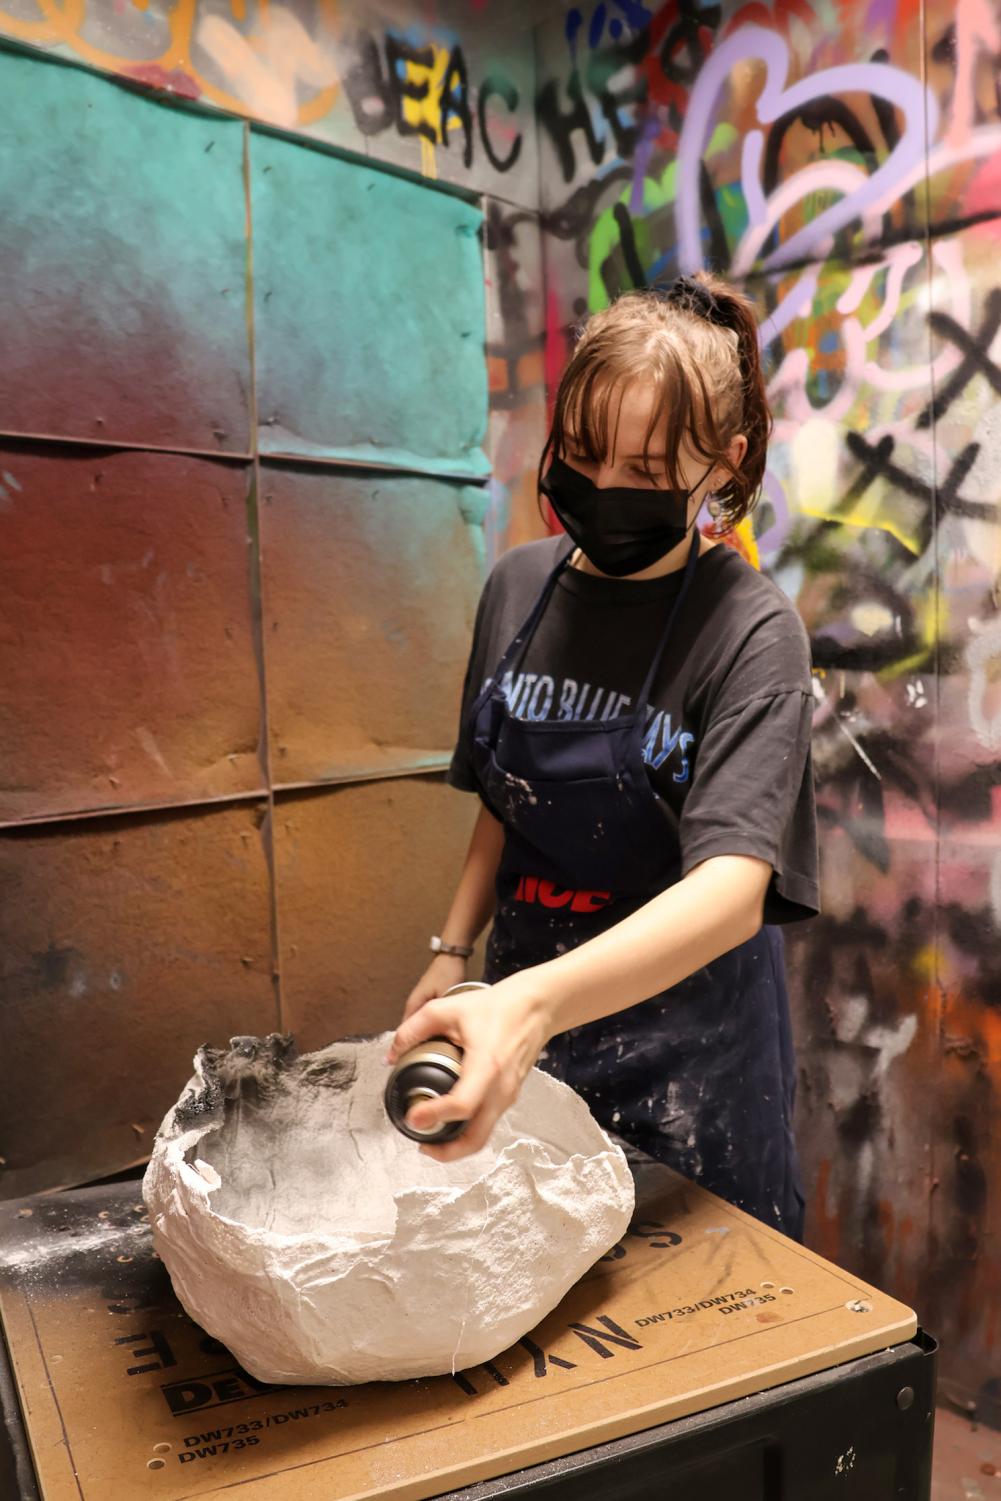 Sarah Gelleny wears a black mask, black t-shirt and a black apron. Sarah holds a bottle of black spray paint and sprays the paint onto a white mold on a wooden table.